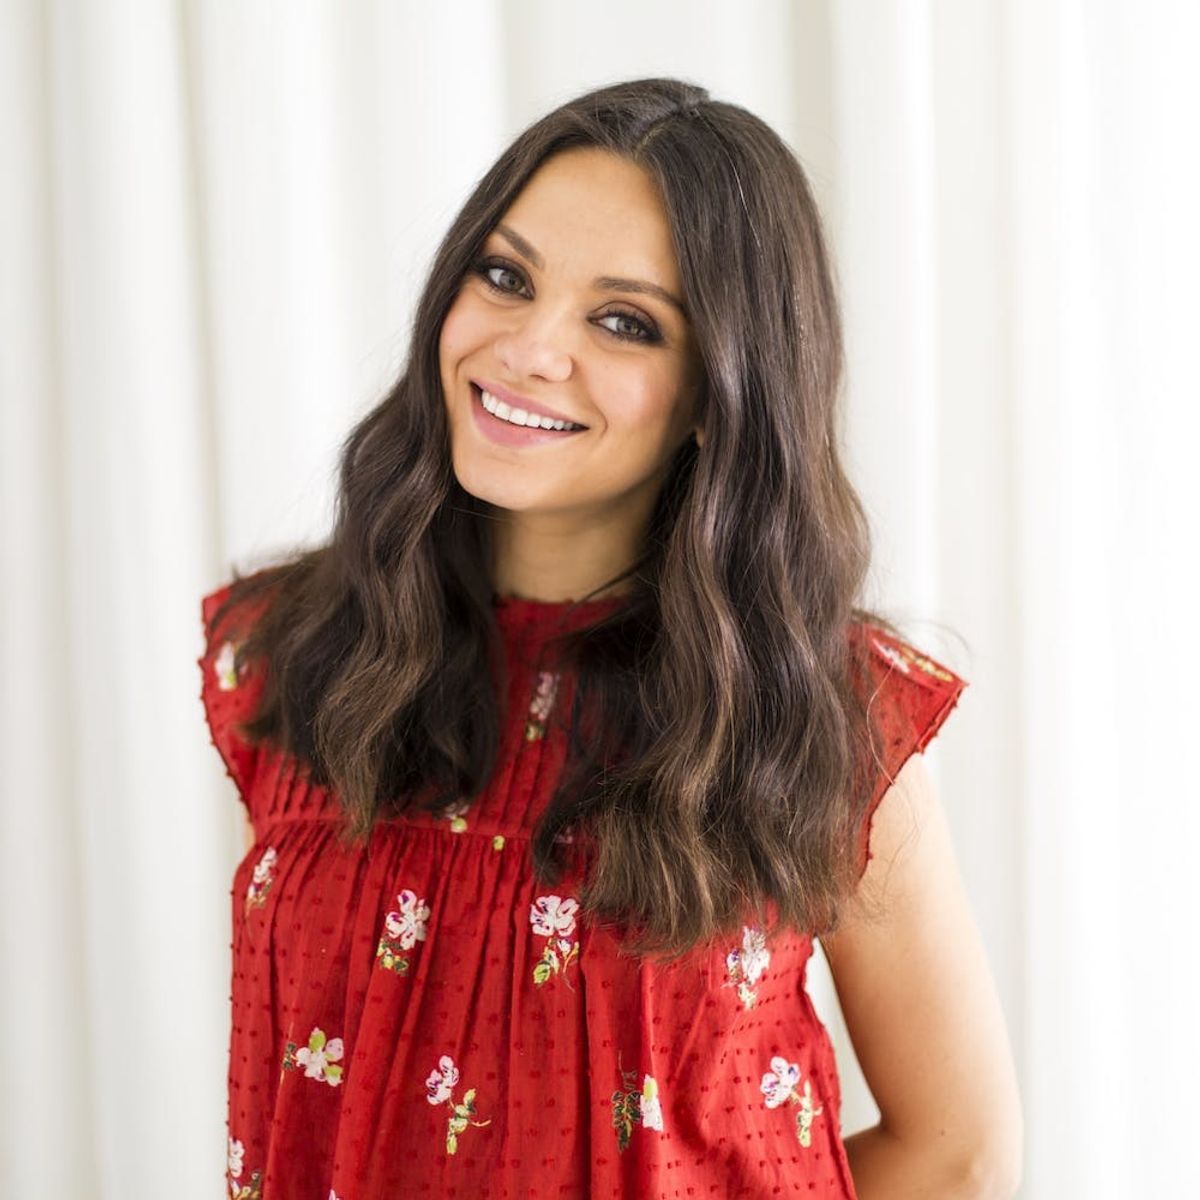 Mila Kunis Reveals Her Baby Name-Picking Strategy (+ She Already Has Name #2!)